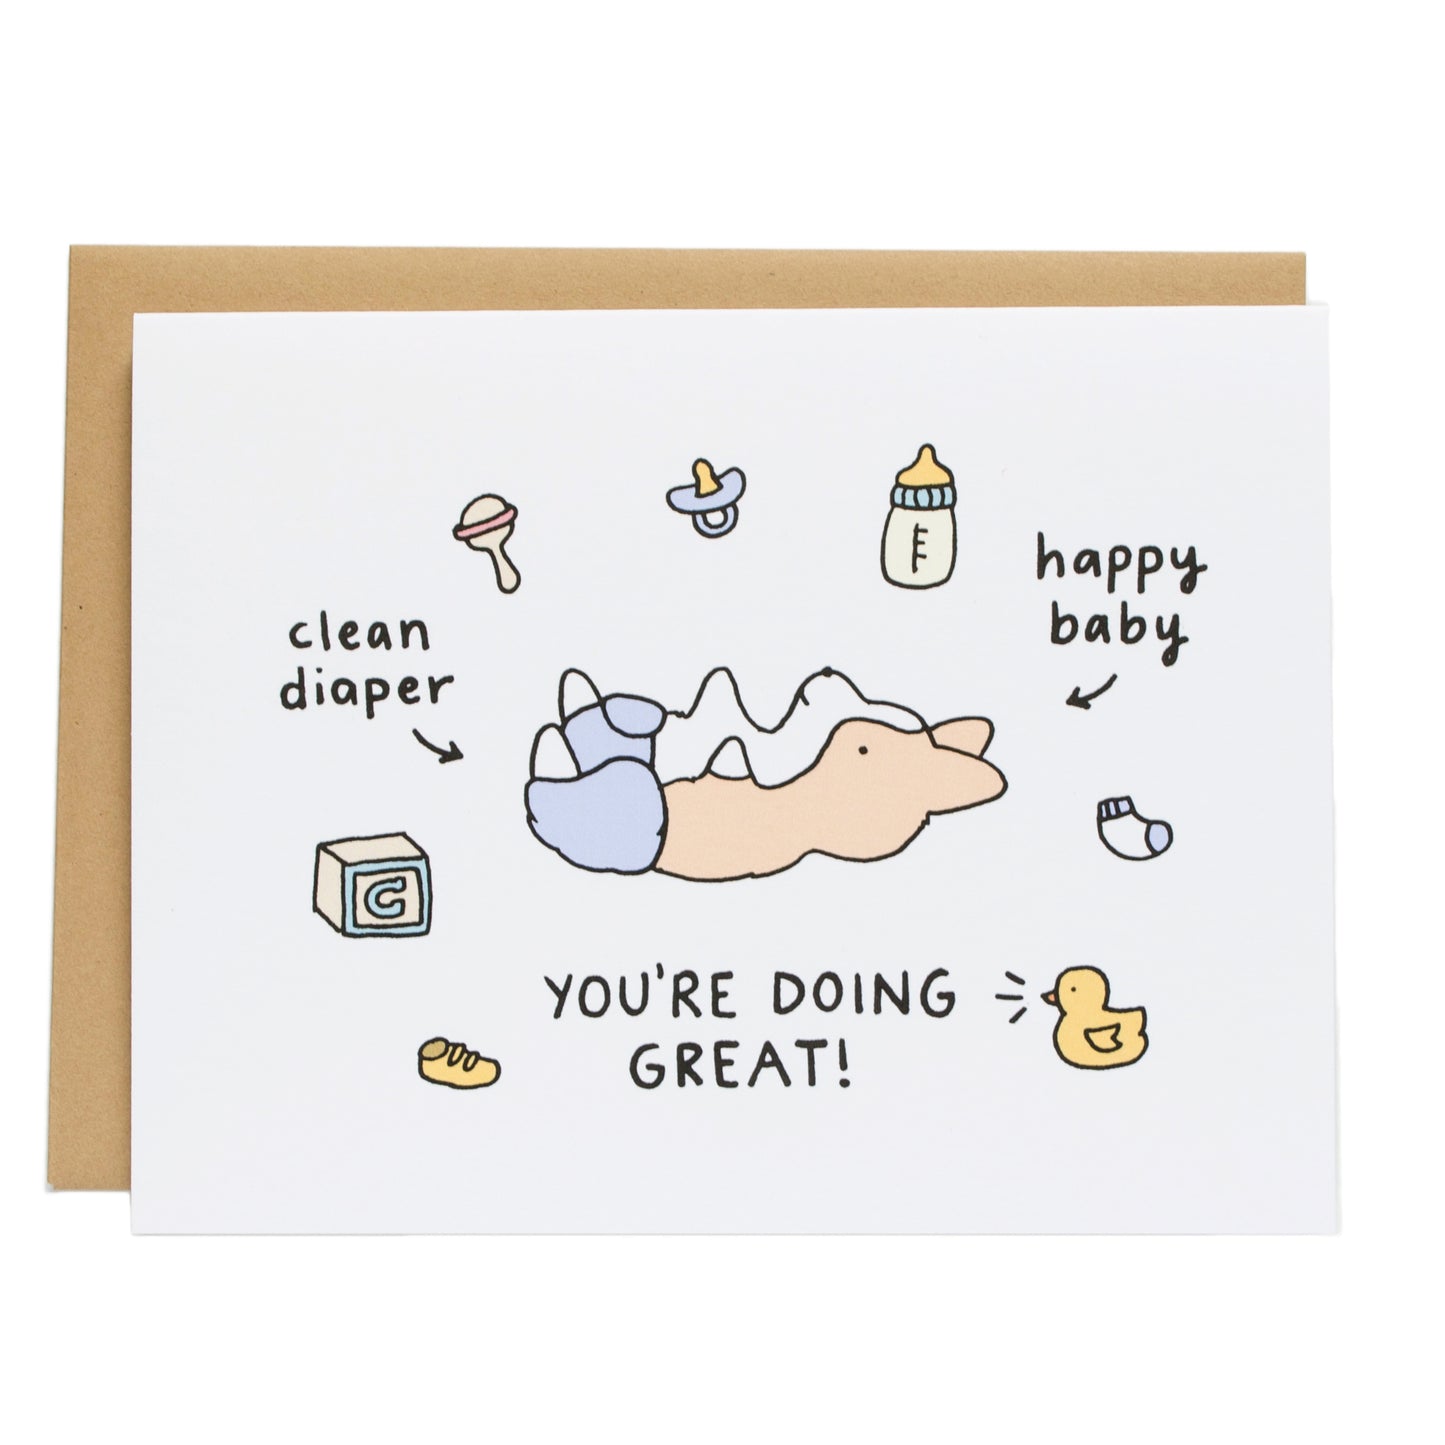 a baby corgi lying on its back wearing a diaper with baby toy blocks, a pacifier, bottle, socks, and baby duck around it. the card reads you're doing great!